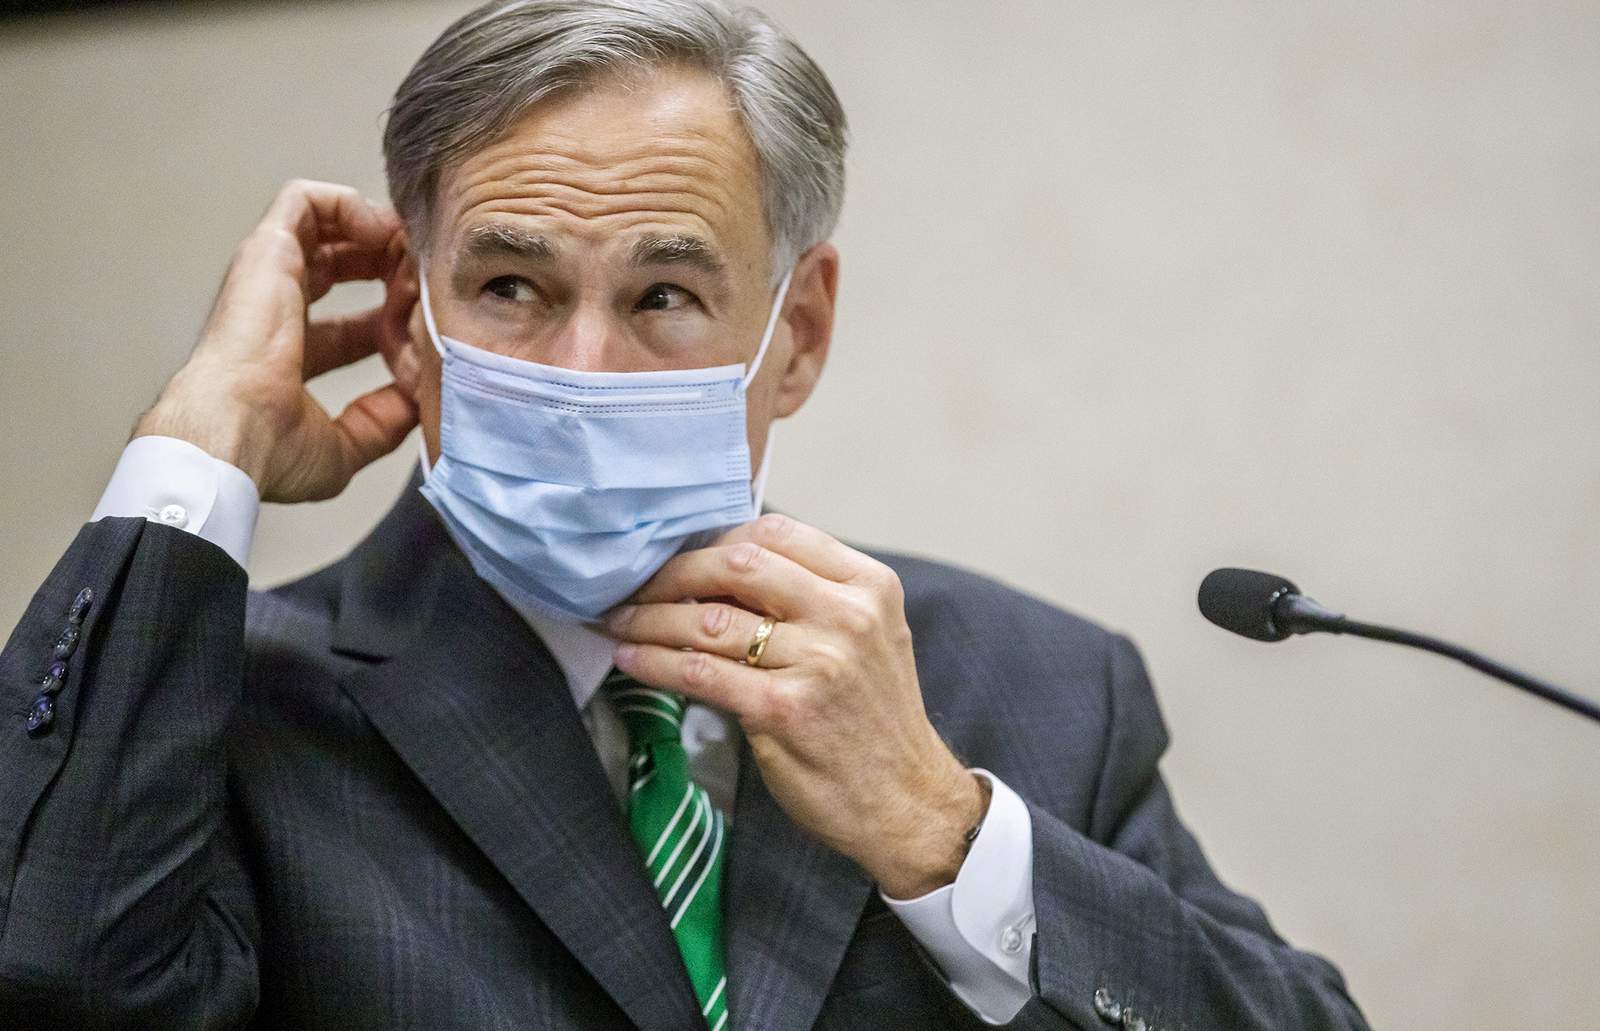 Texas governor issues mask order to fight coronovirus